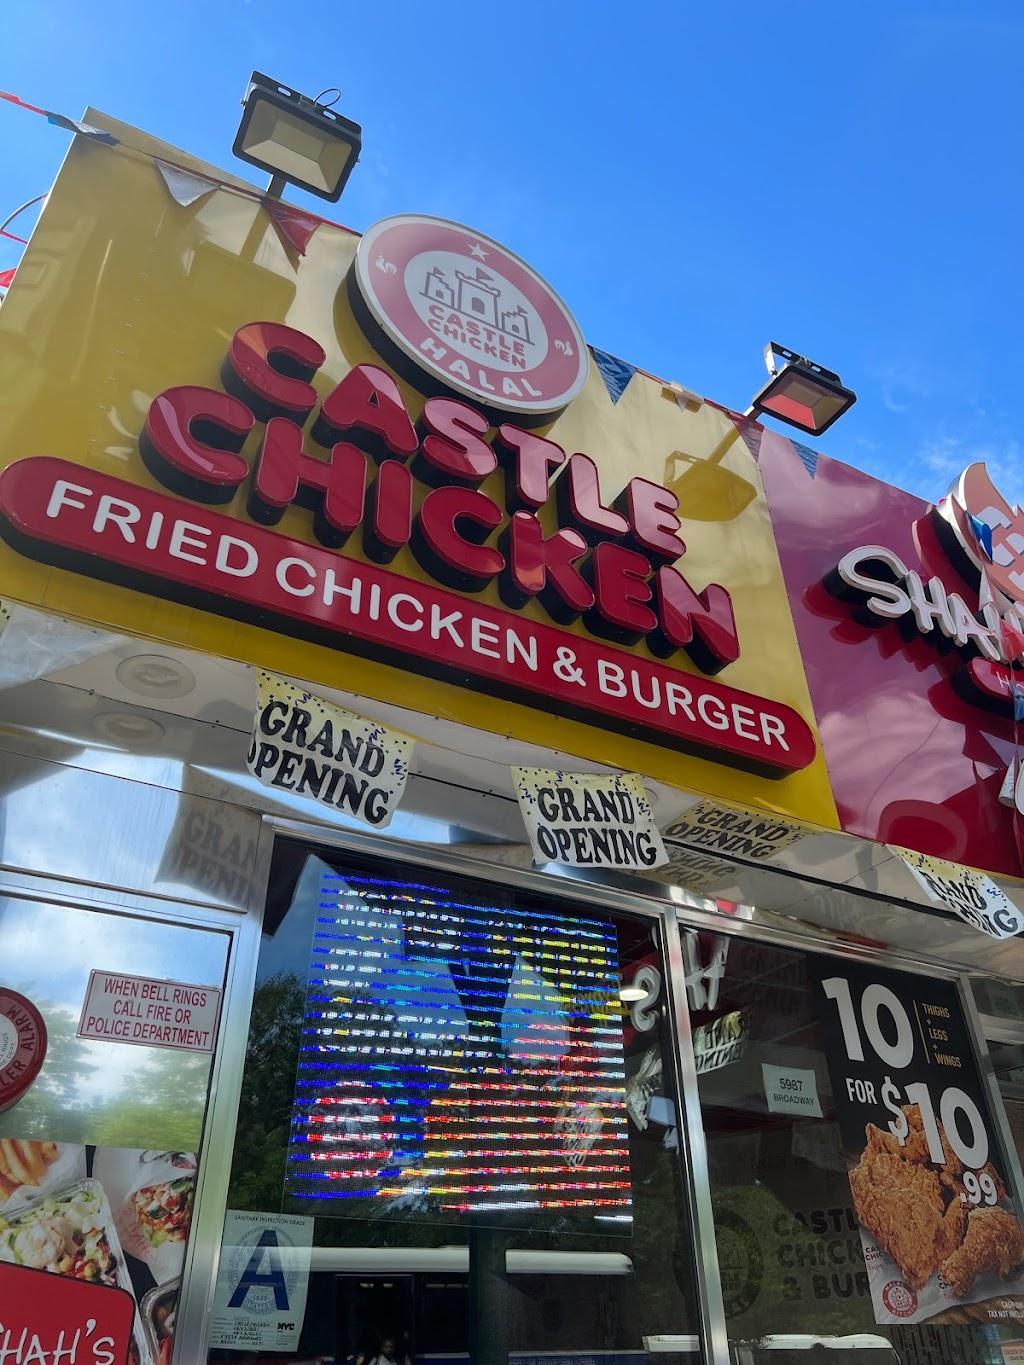 Castle chicken and burgers and shahs express | 5987 Broadway, The Bronx, NY 10471 | Phone: (718) 618-0044